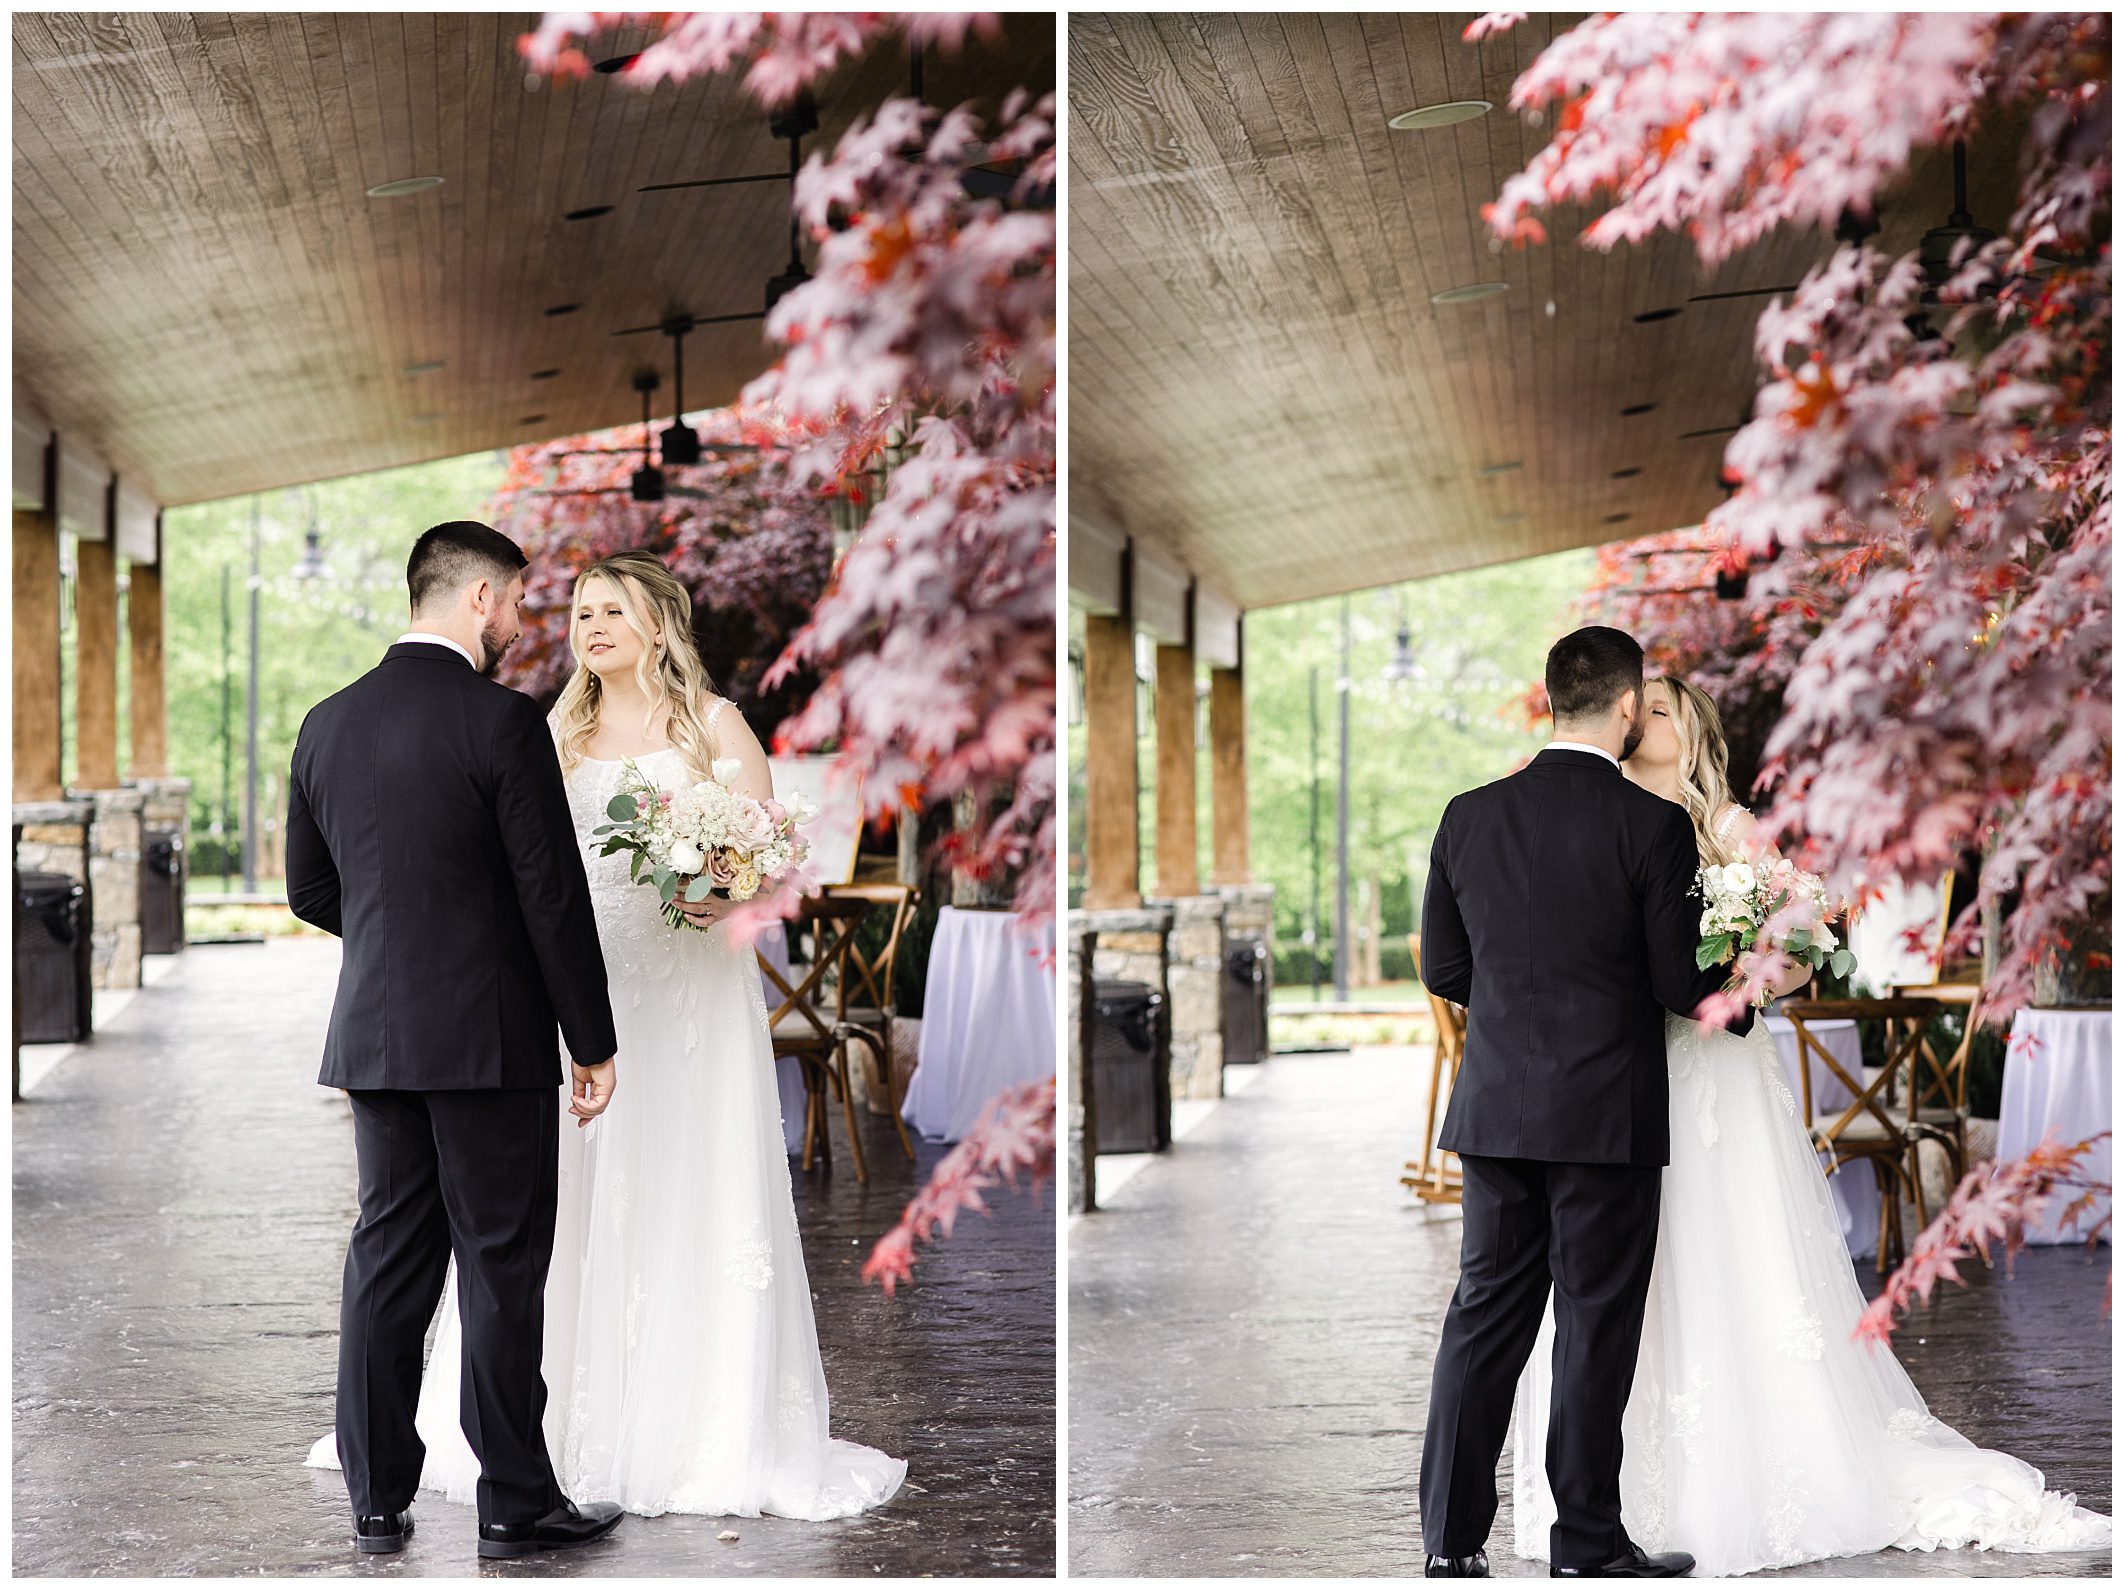 A bride and groom stand under a pavilion with autumn leaves at Chestnut Ridge, facing each other and holding hands, in an intimate mountain wedding moment.